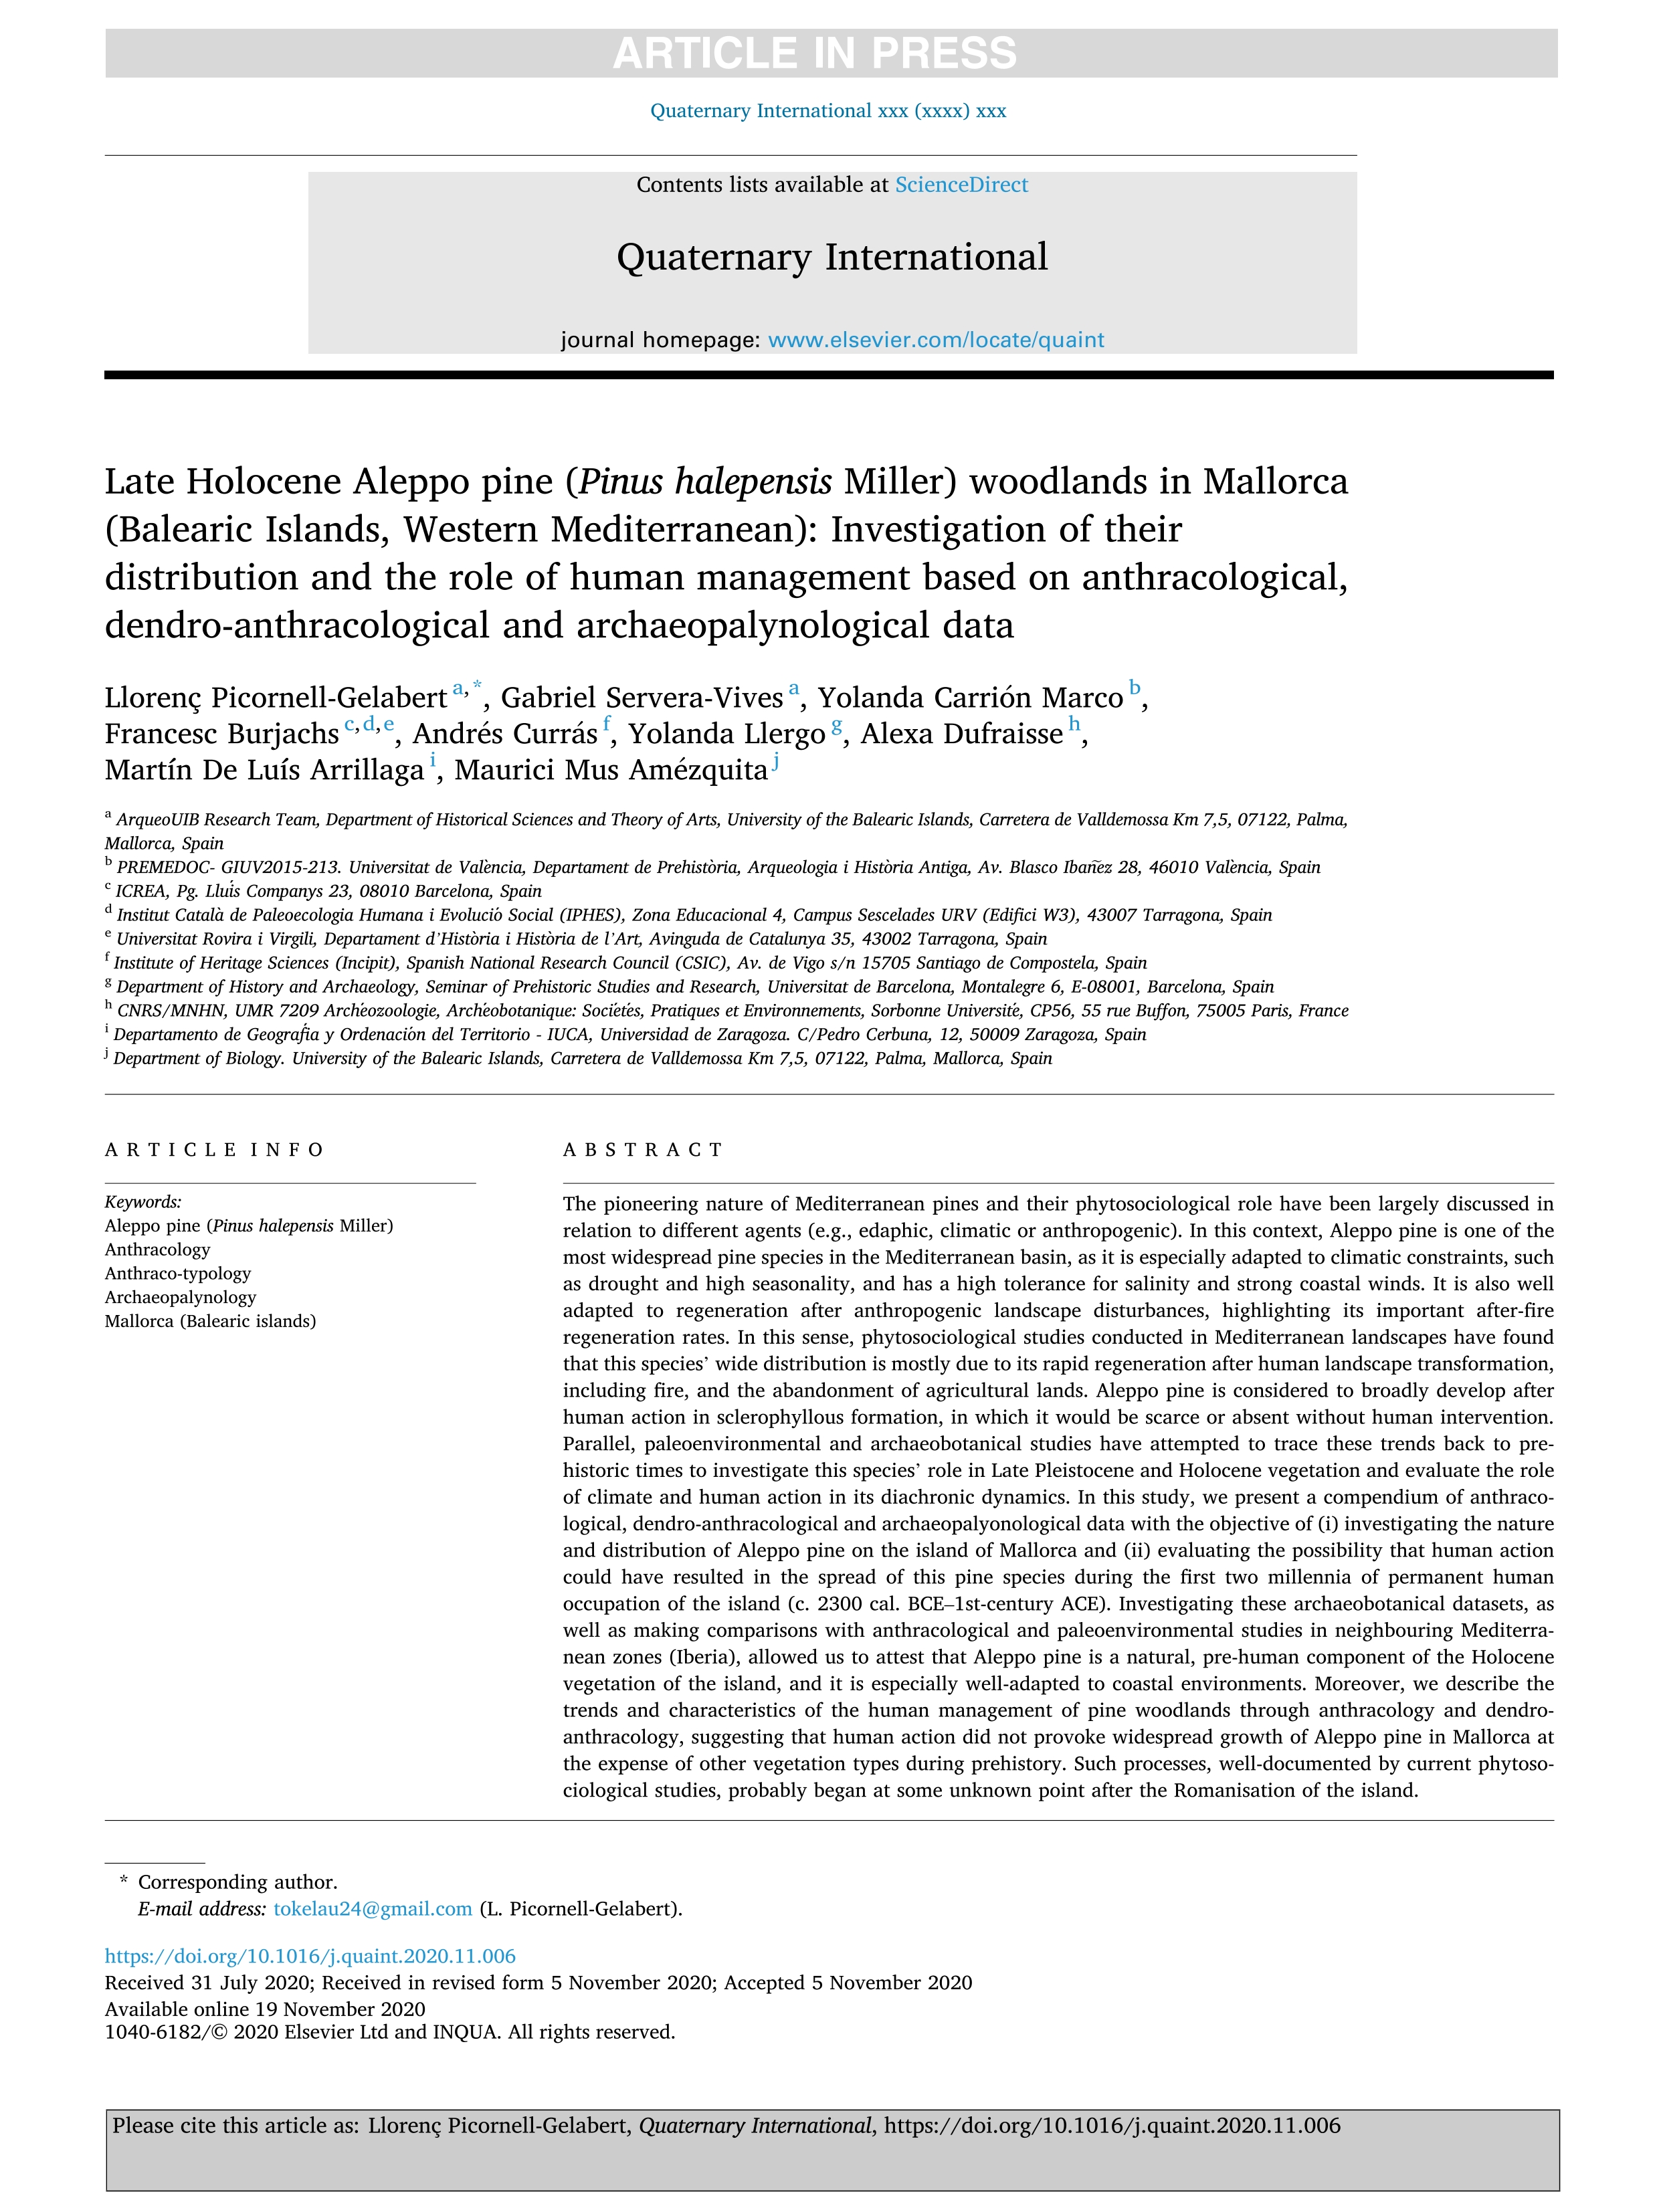 Late Holocene Aleppo pine (Pinus halepensis Miller) woodlands in Mallorca (Balearic Islands, Western Mediterranean): Investigation of their distribution and the role of human management based on anthracological, dendro-anthracological and archaeopalynological data